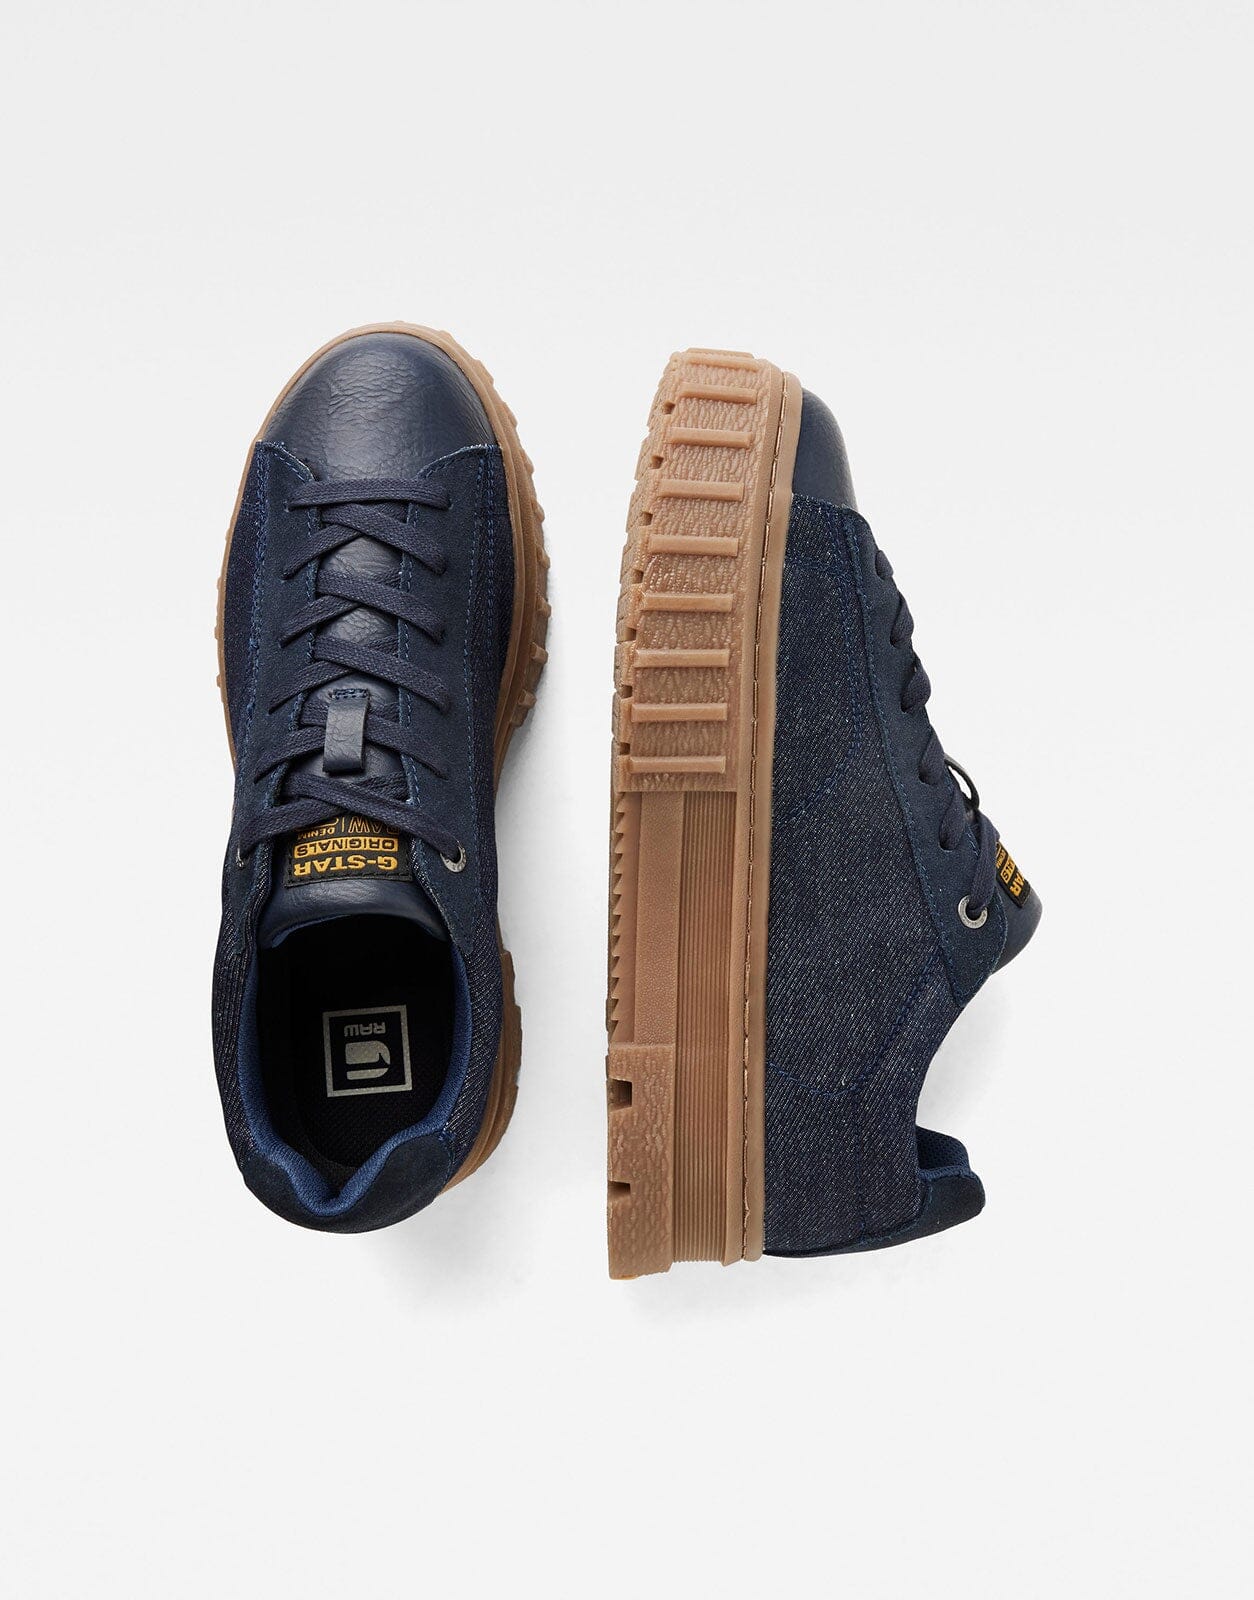 Shop Markham G-Star Raw Products Online In South Africa | Bash